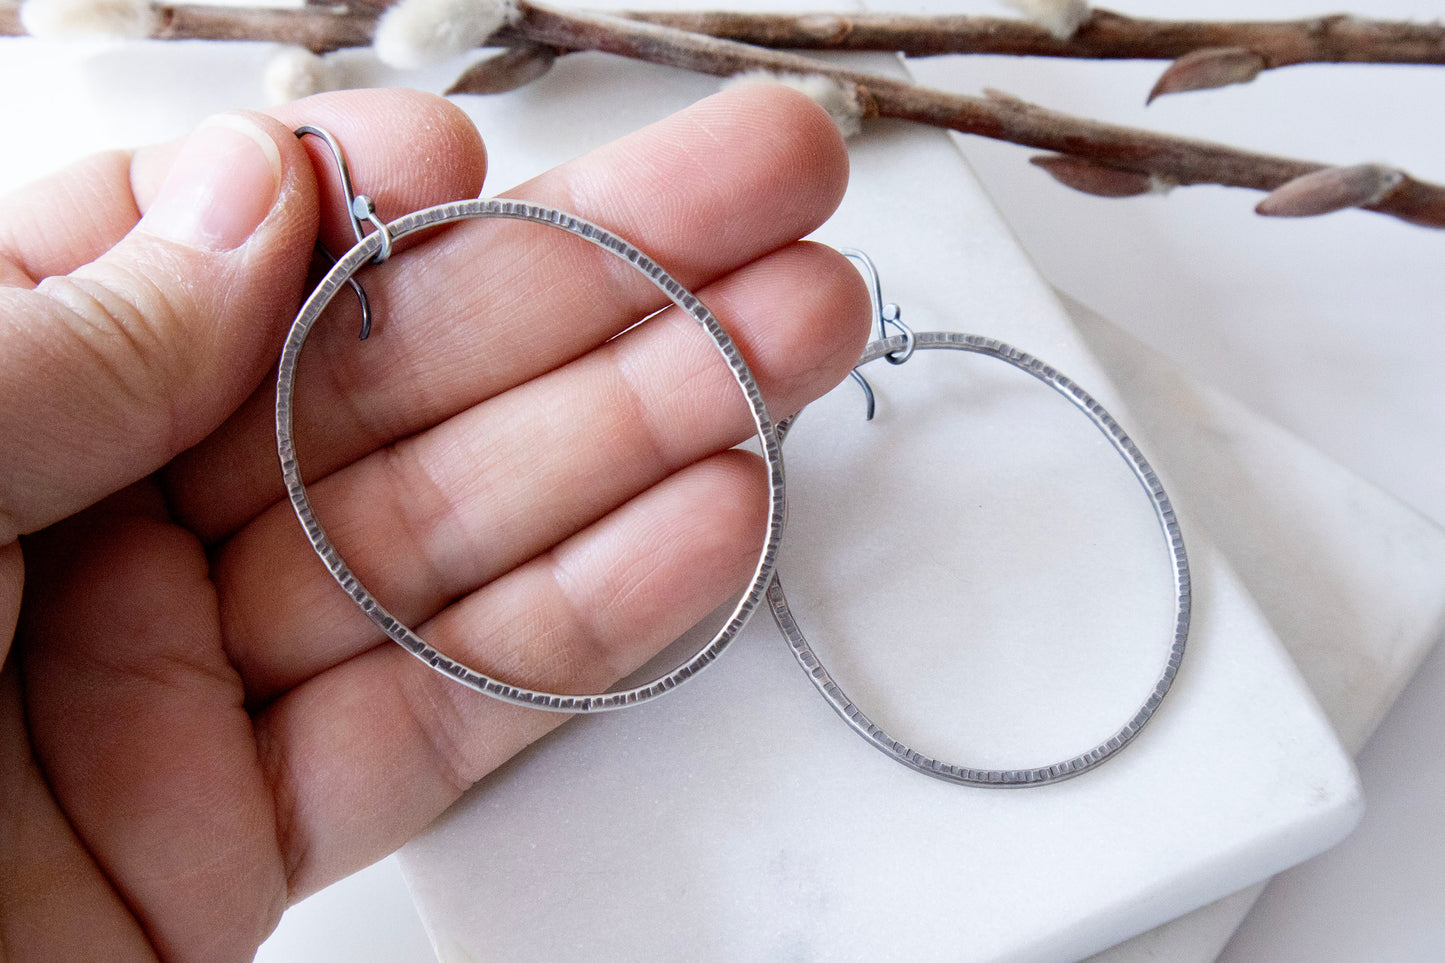 Oval Forged Hoops - XL